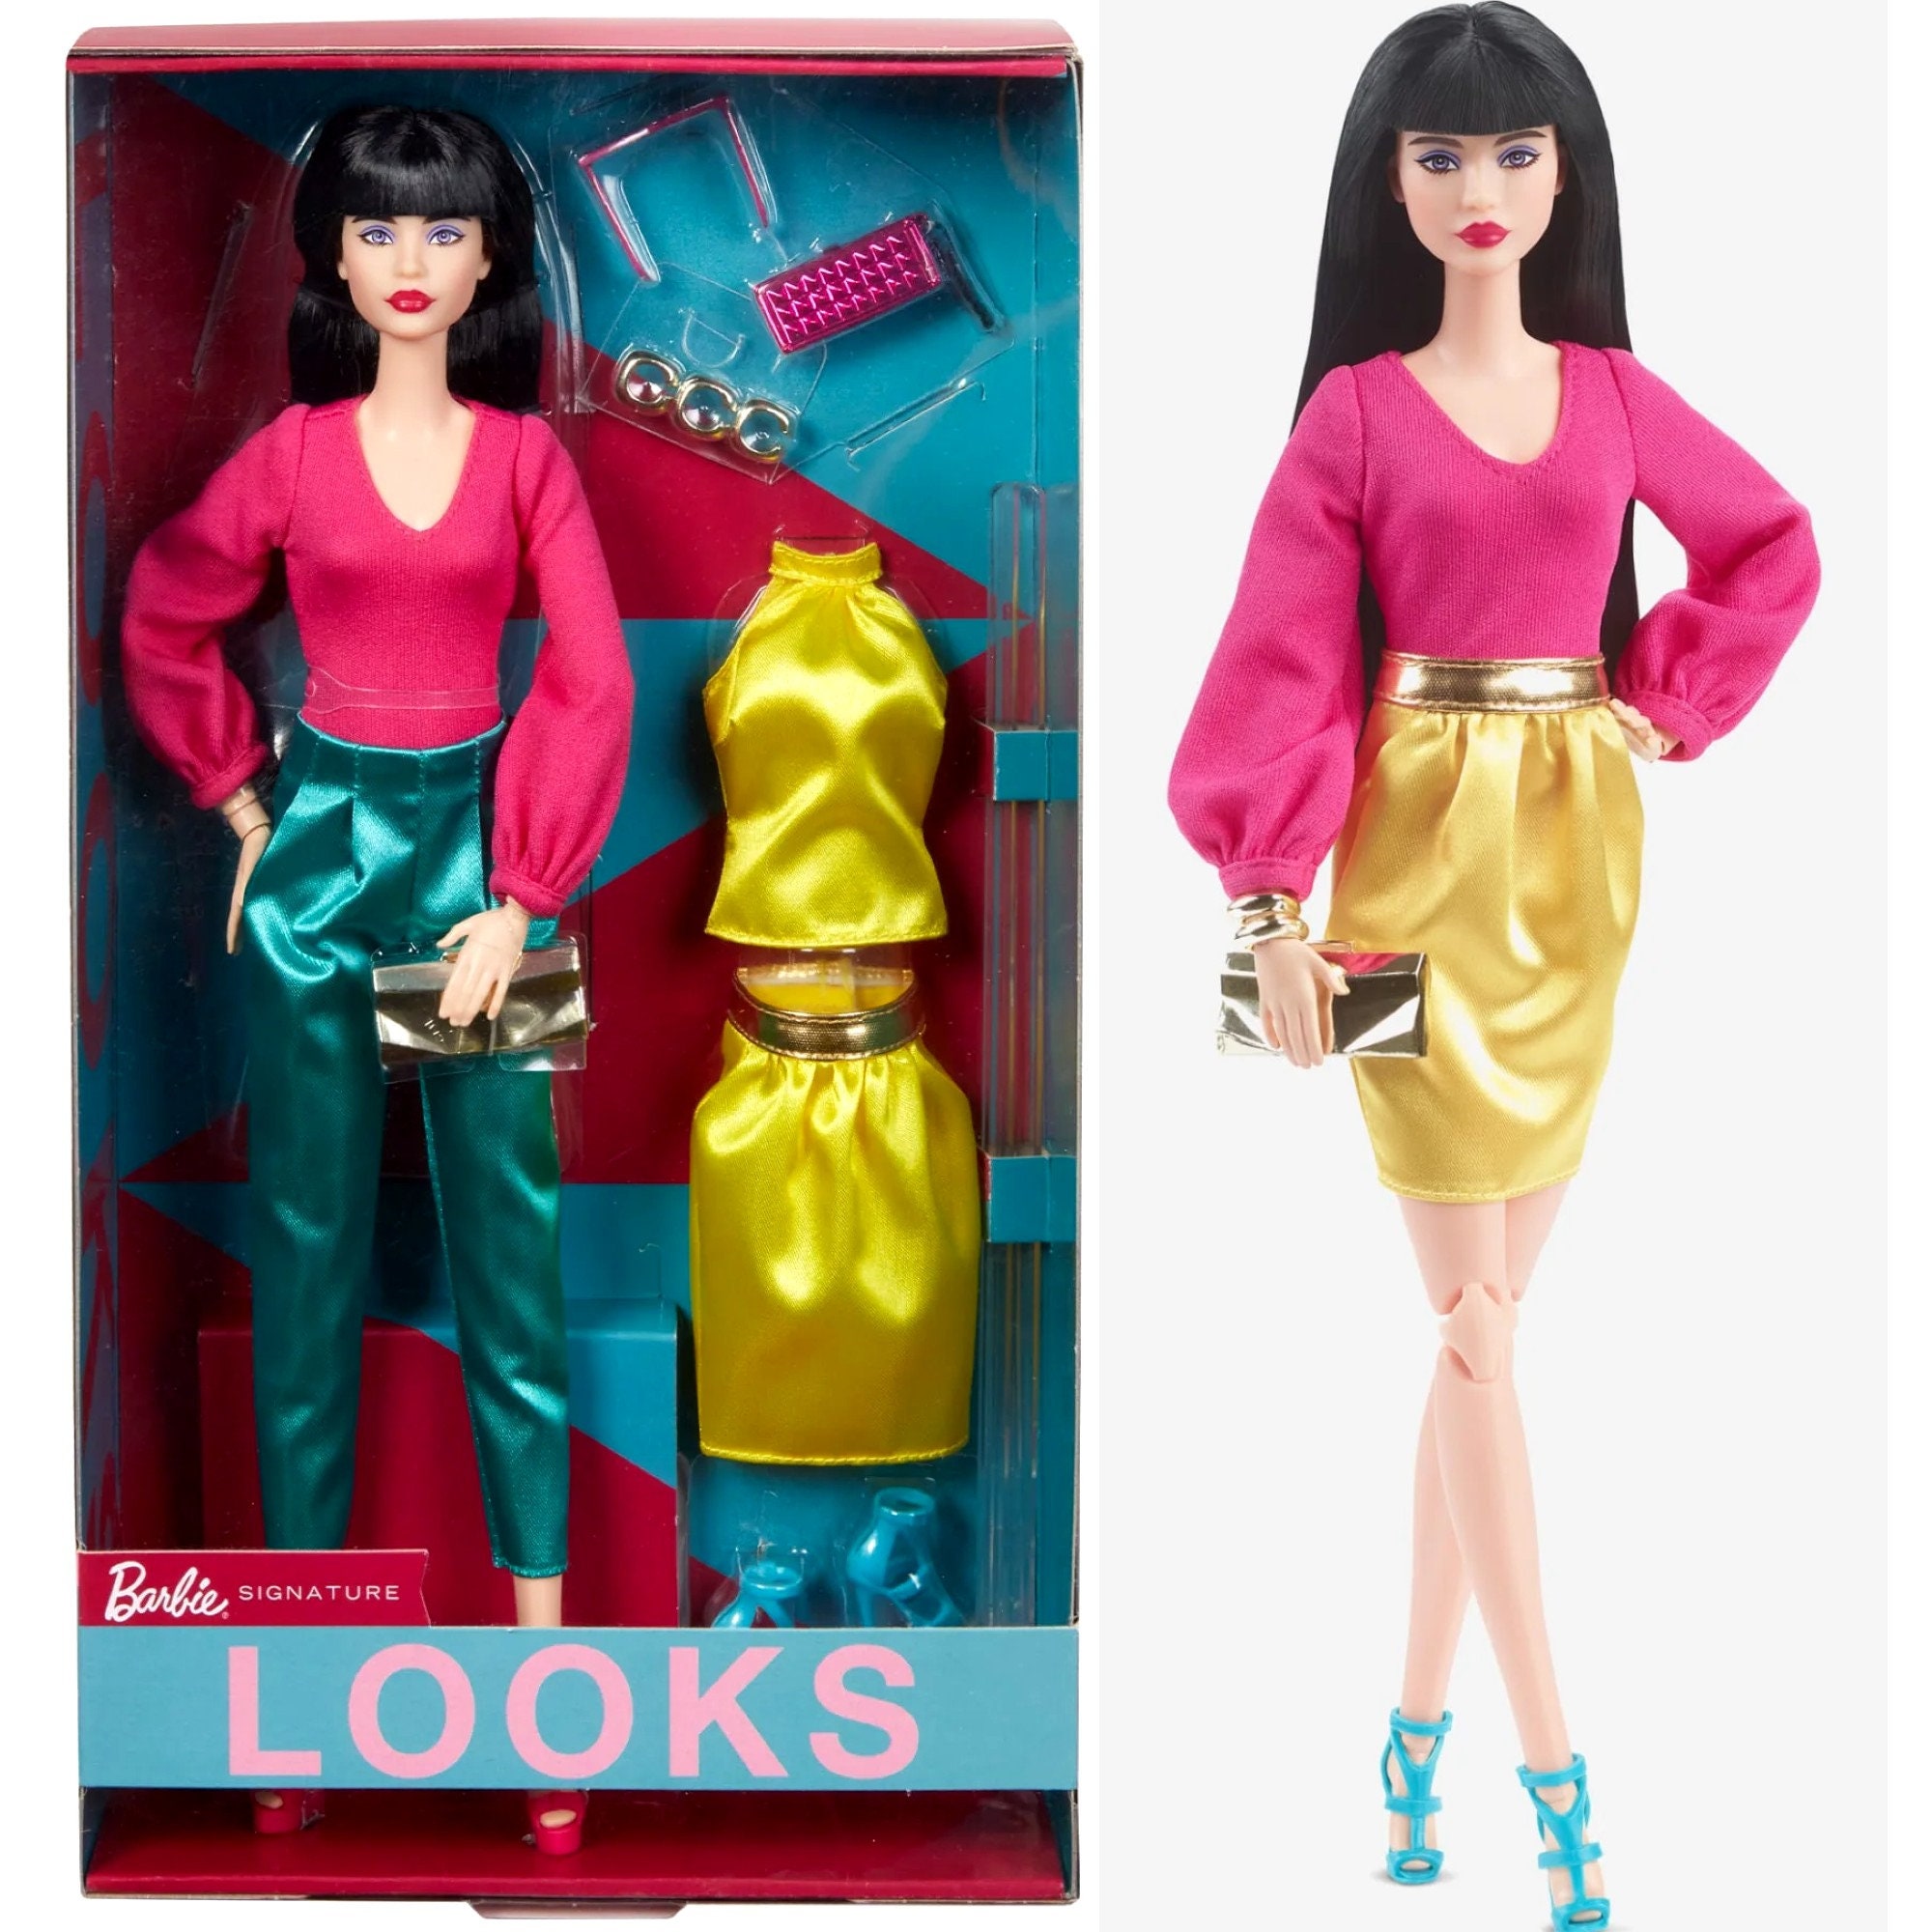 Barbie Signature Barbie Looks Doll (Petite, Red Hair) Fully Posable Fashion  Doll Wearing Glittery Crop Top & Skirt, Gift for Collectors